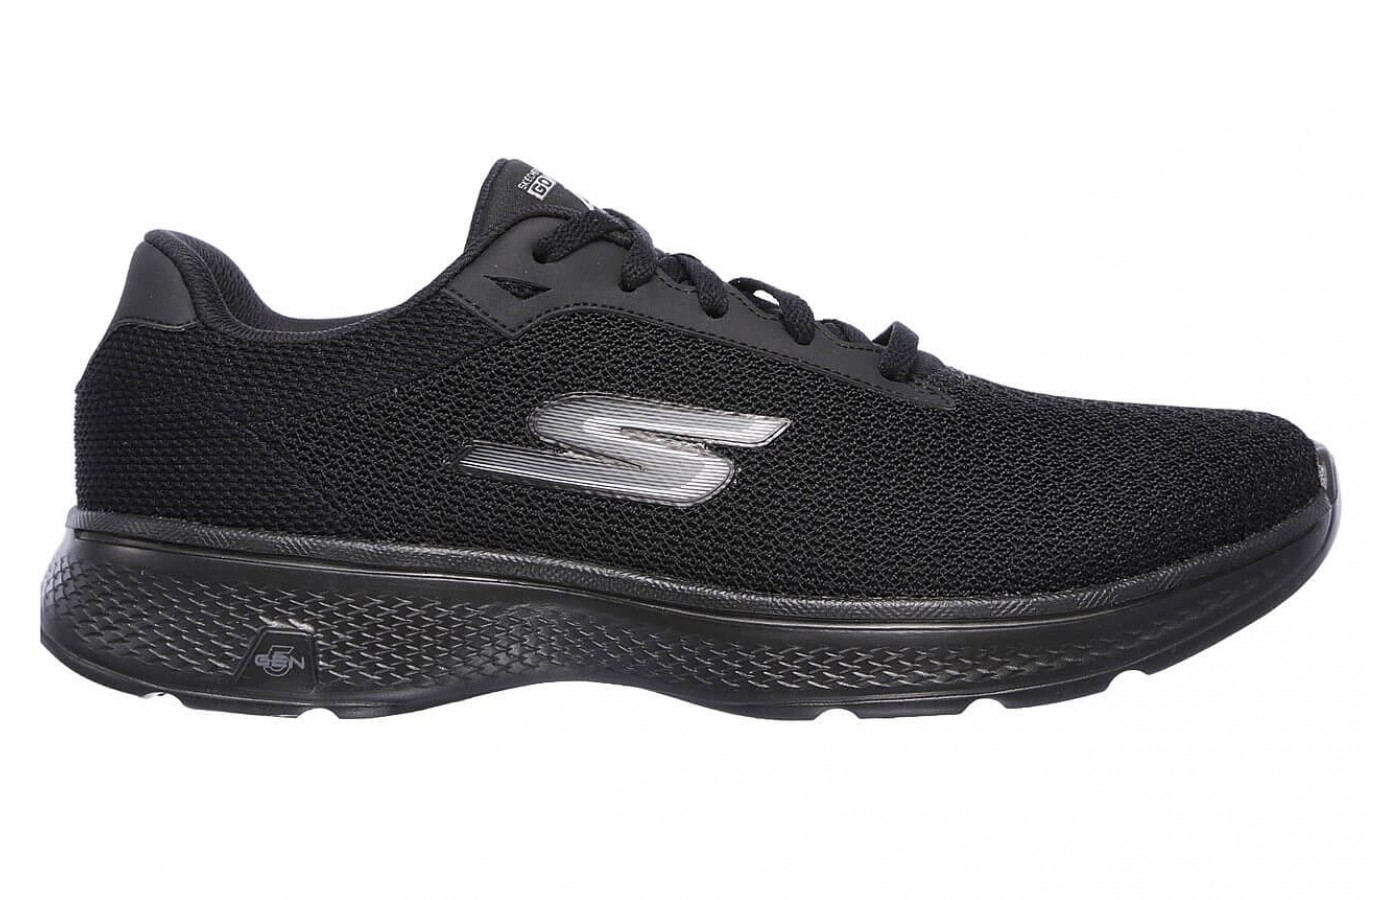 A side view of the Skechers GoWalk 4.